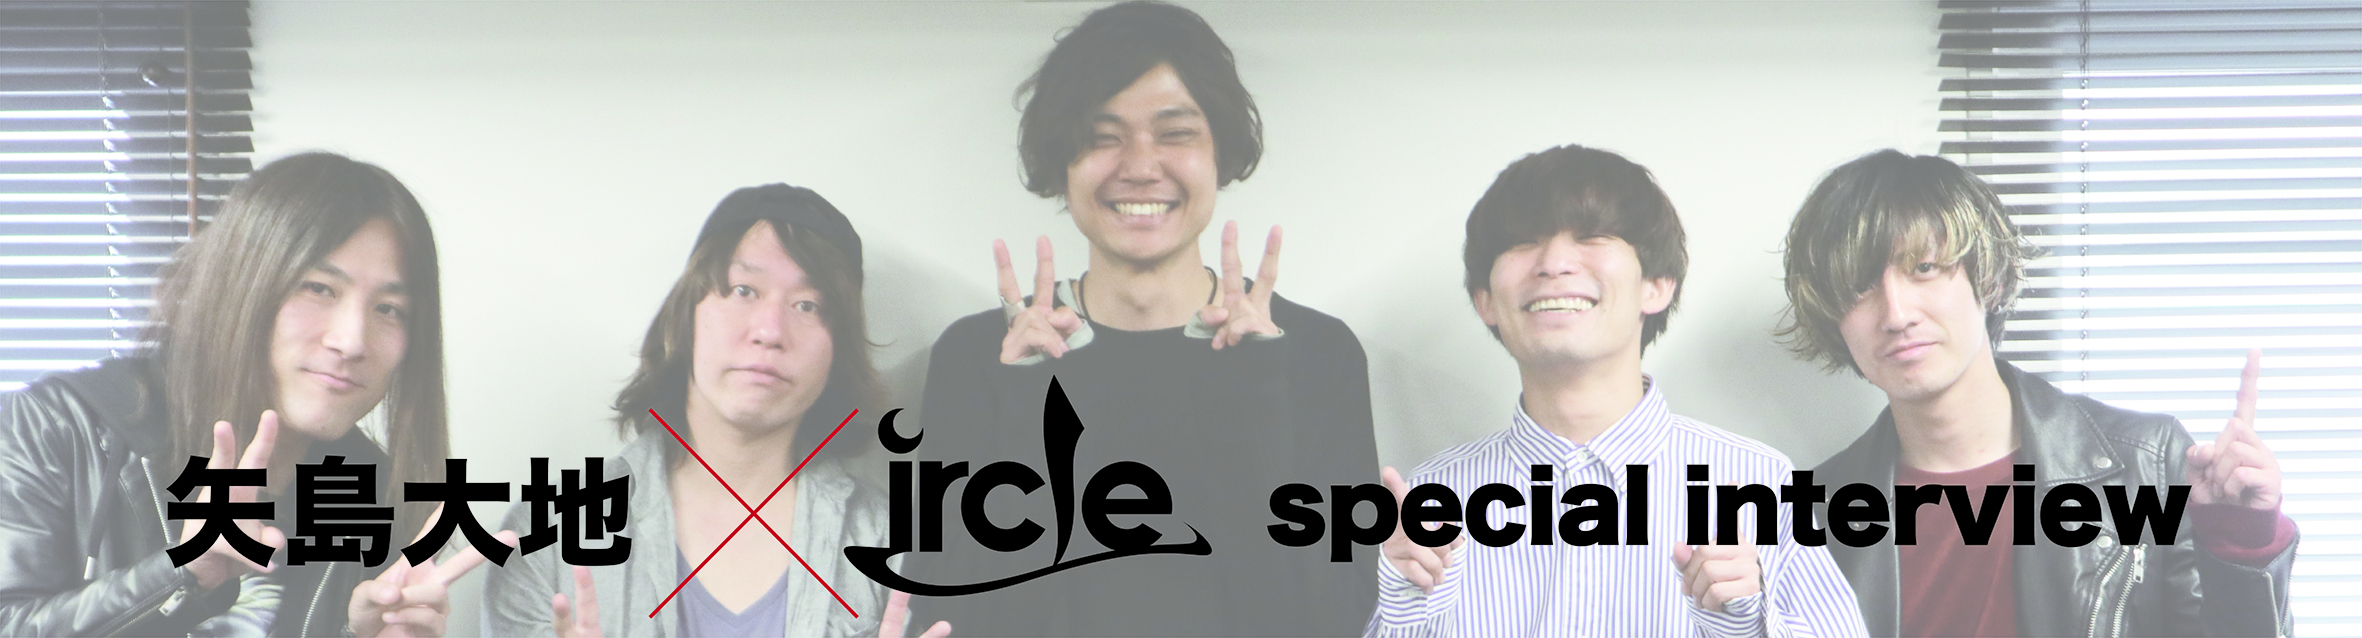 ircle × 矢島大地 special interview